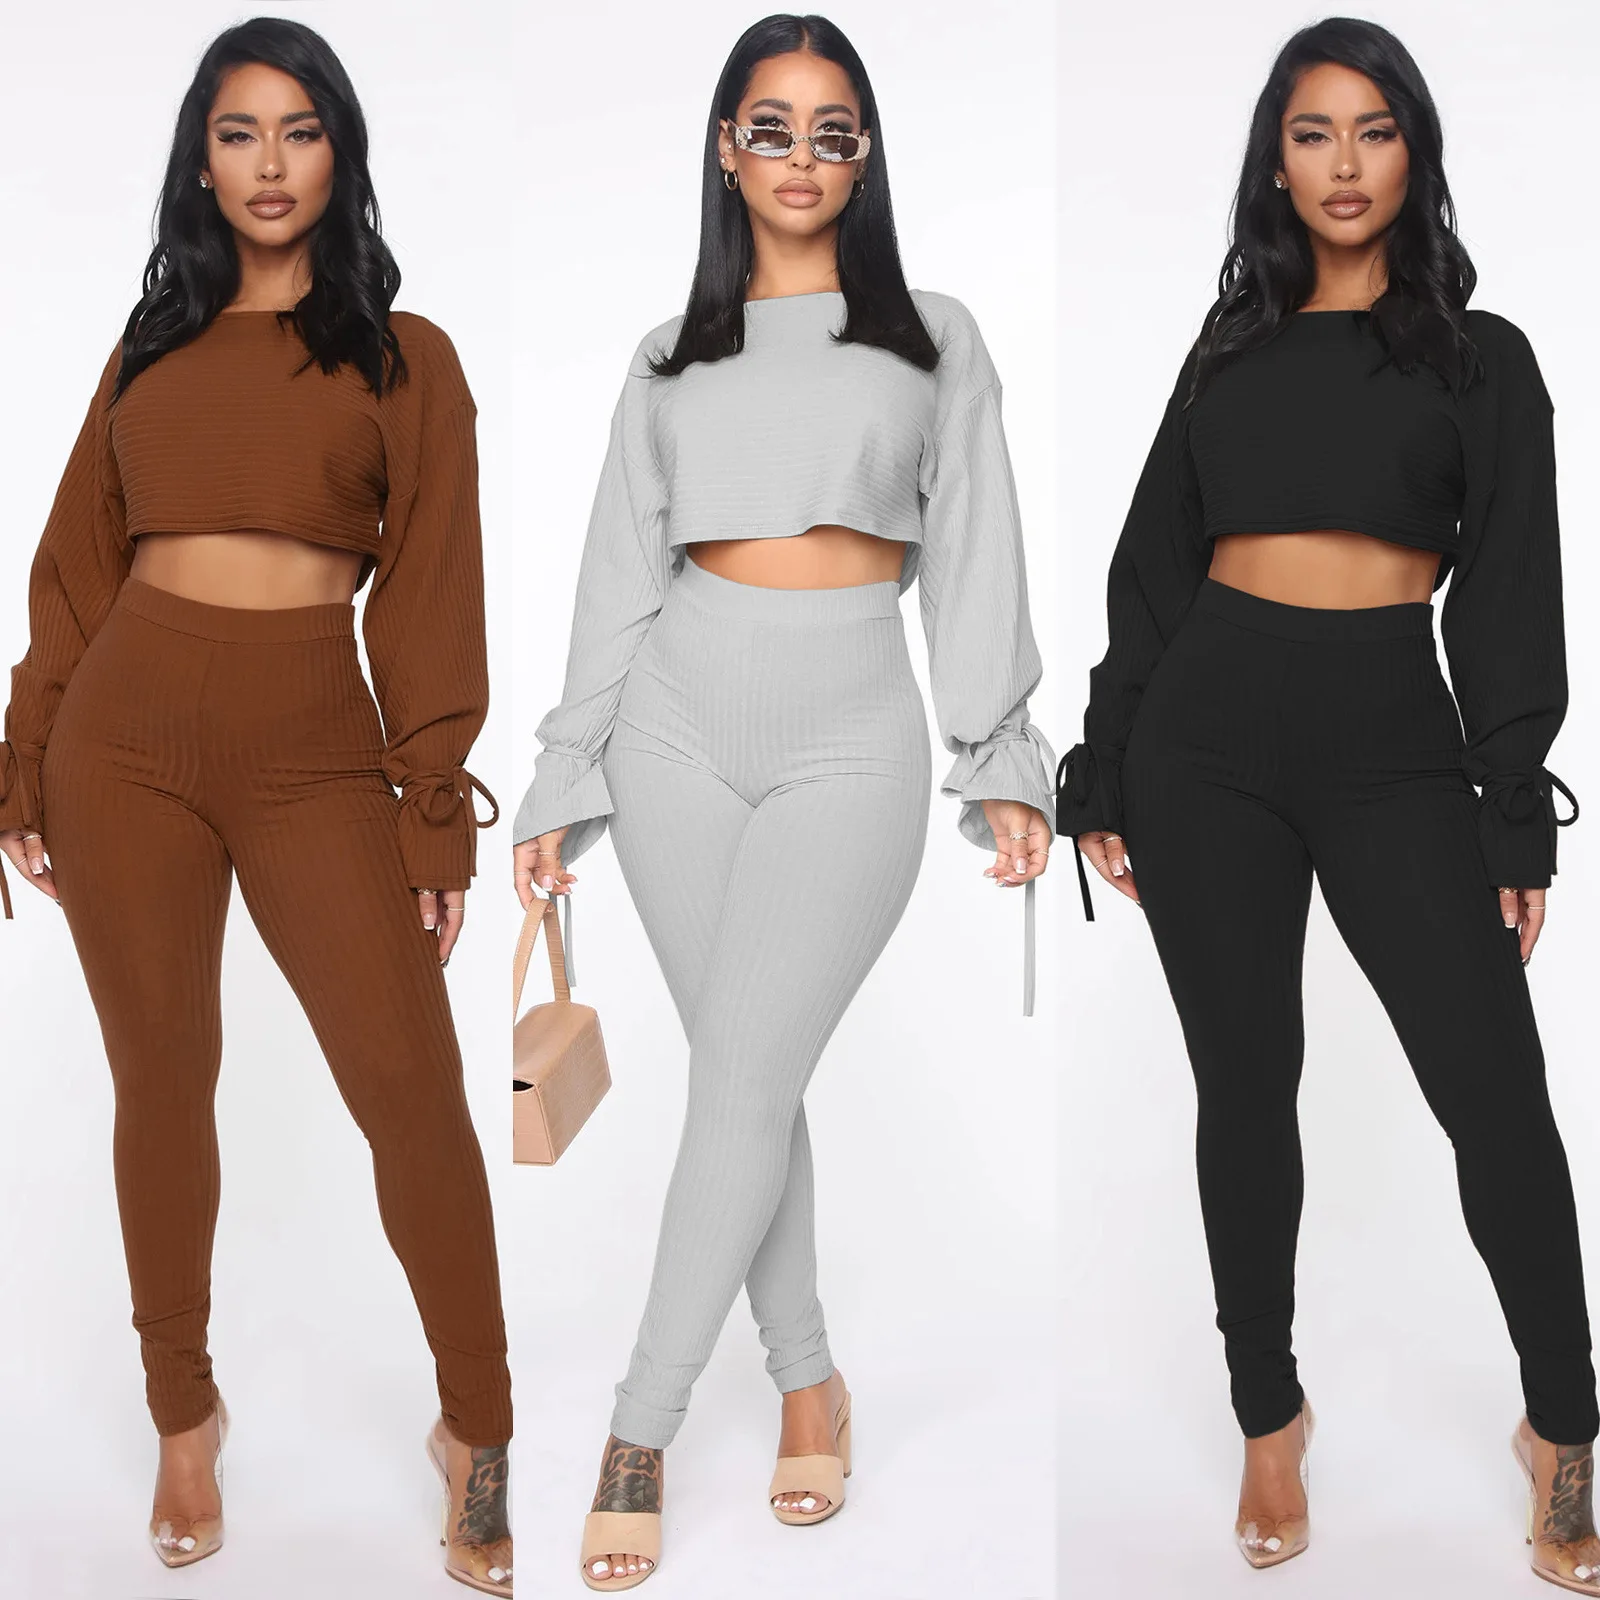 

ladies casual skims cozy lounge wear two piece set spring outfits for women 2022 sweatsuit blank pants set tech tracksuit, Picture shows